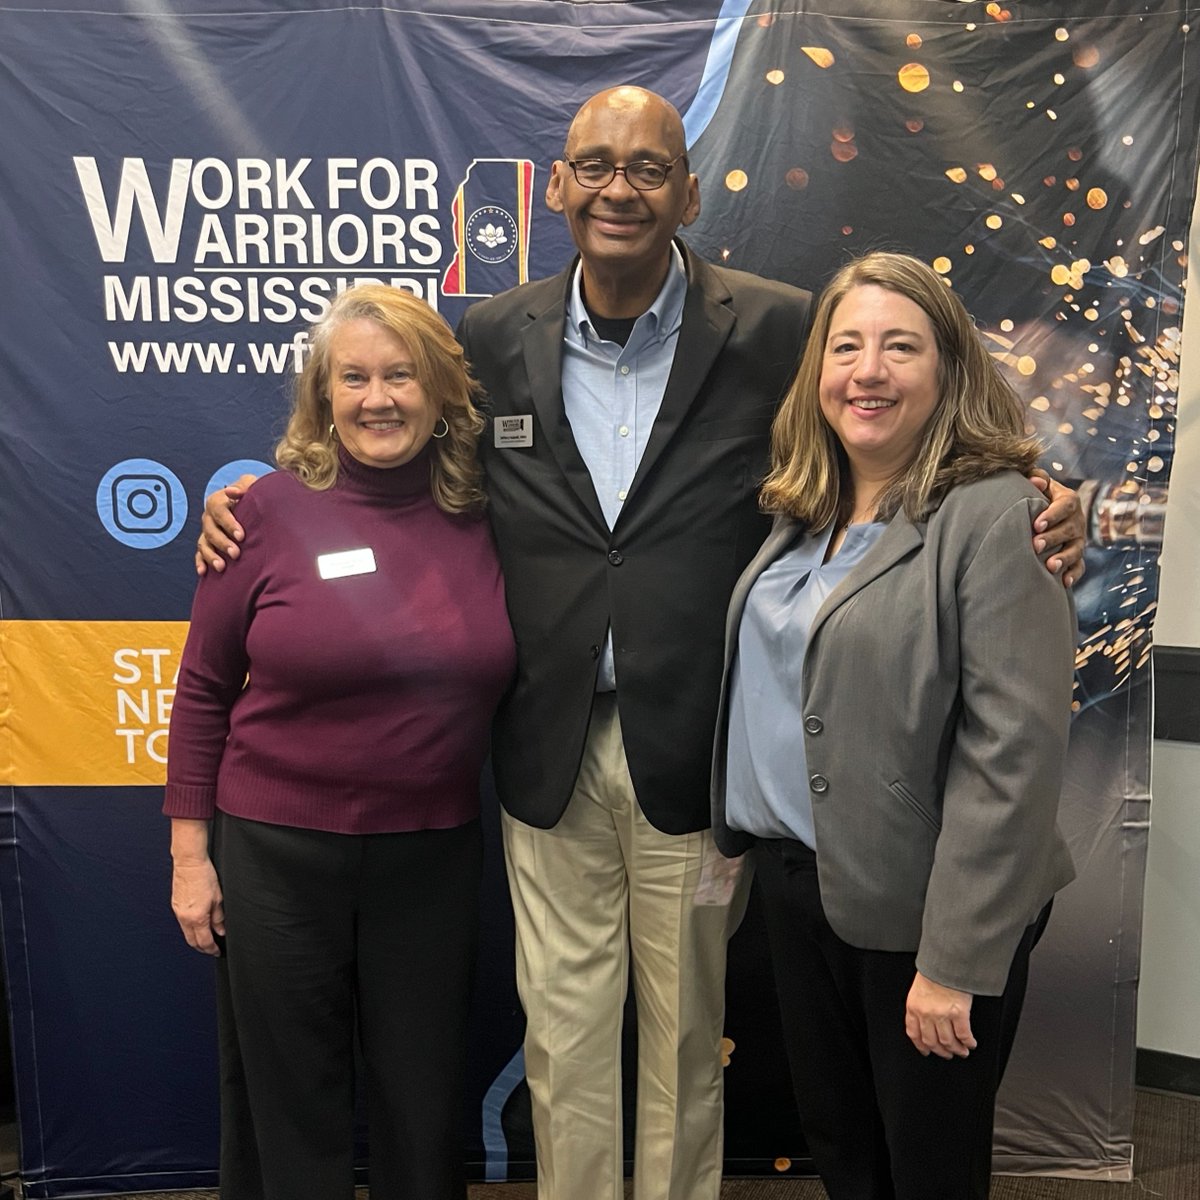 Employment Coordinator, Jeffery Isabell, attended the Military One Coast annual meeting with the @MSCoastChamber yesterday. He gained invaluable insights into what is happening in our military and connected with others in the community. #workforwarriors #jobsforveterans